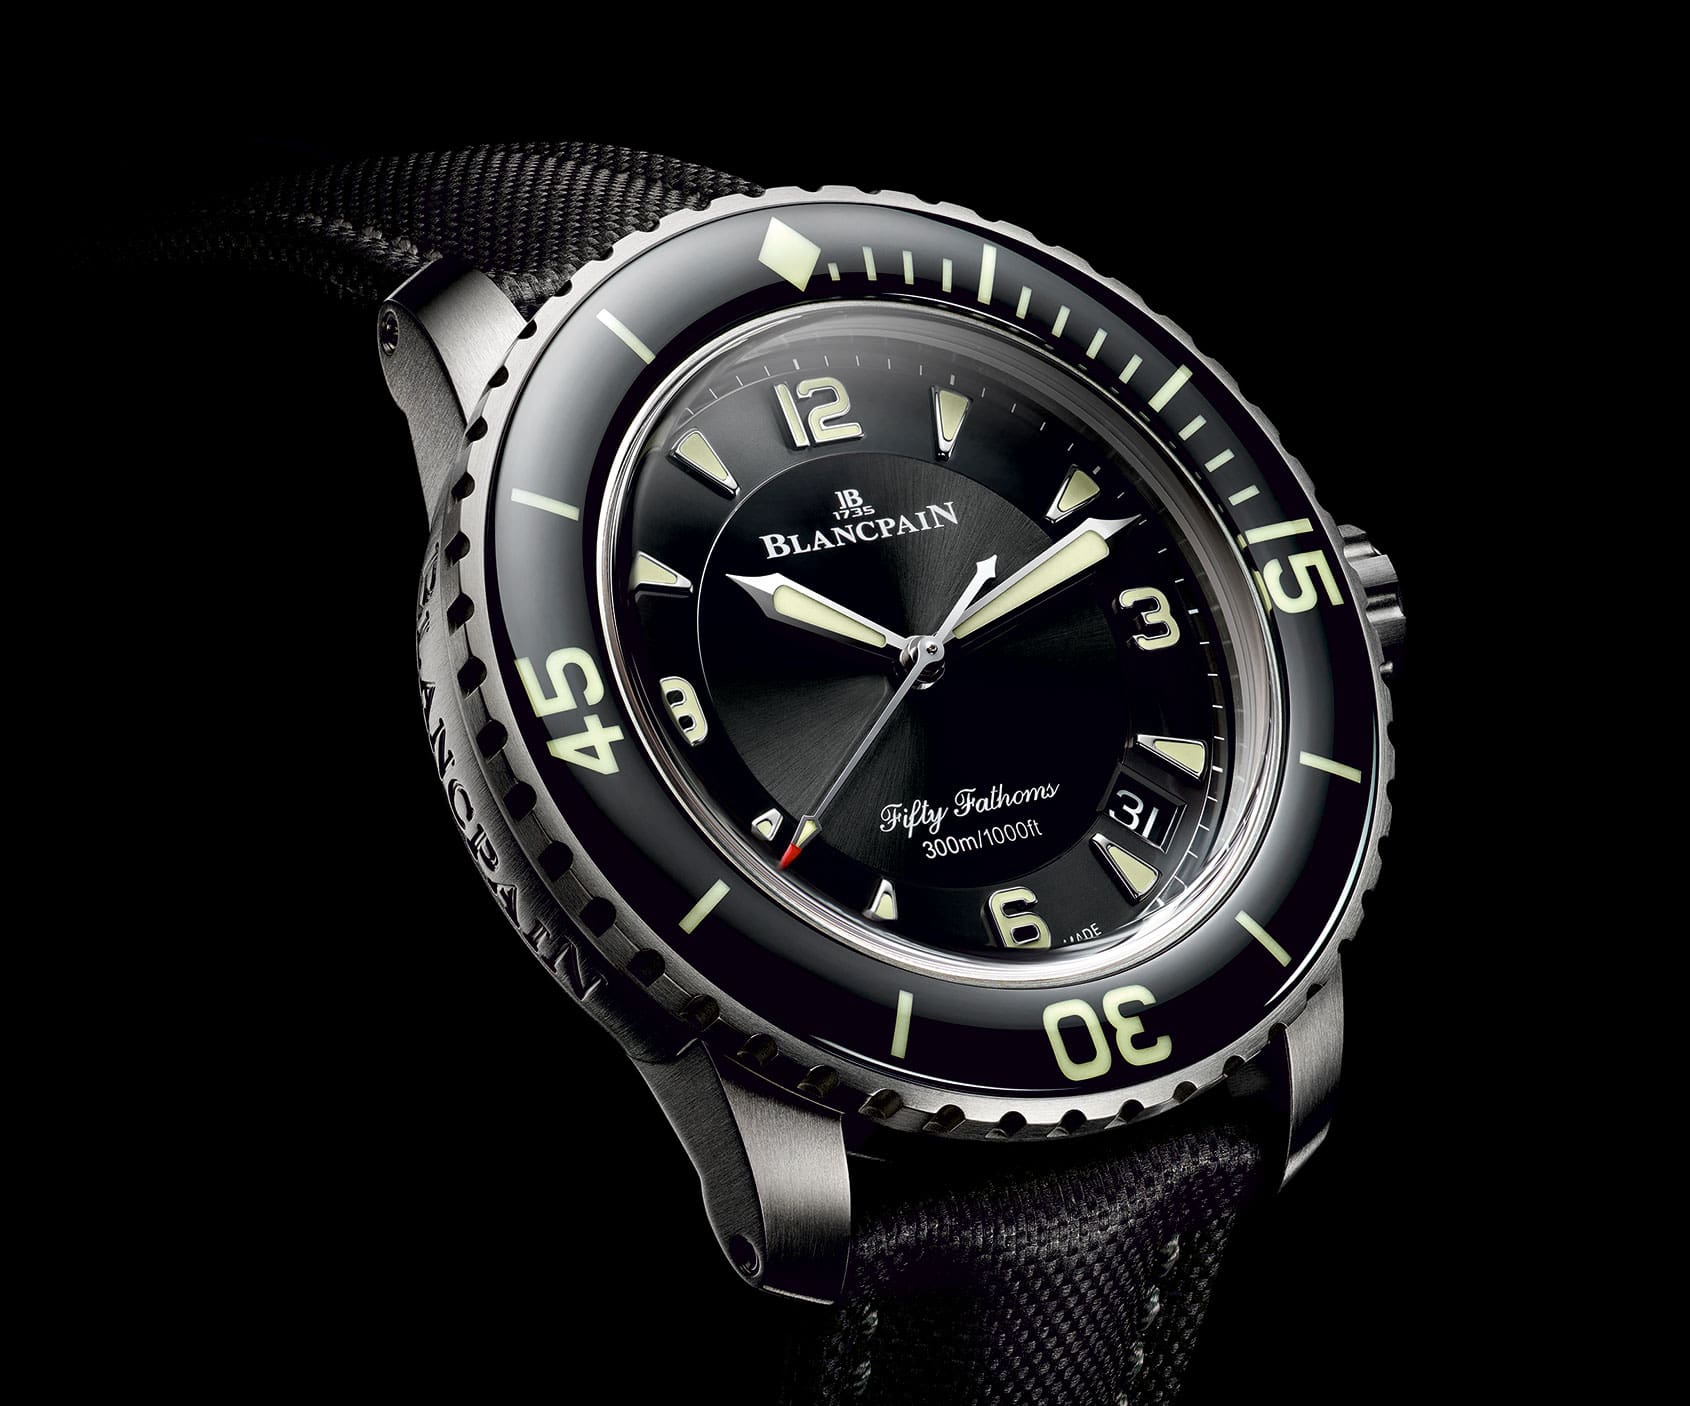 INTRODUCING: The Blancpain Fifty Fathoms in titanium